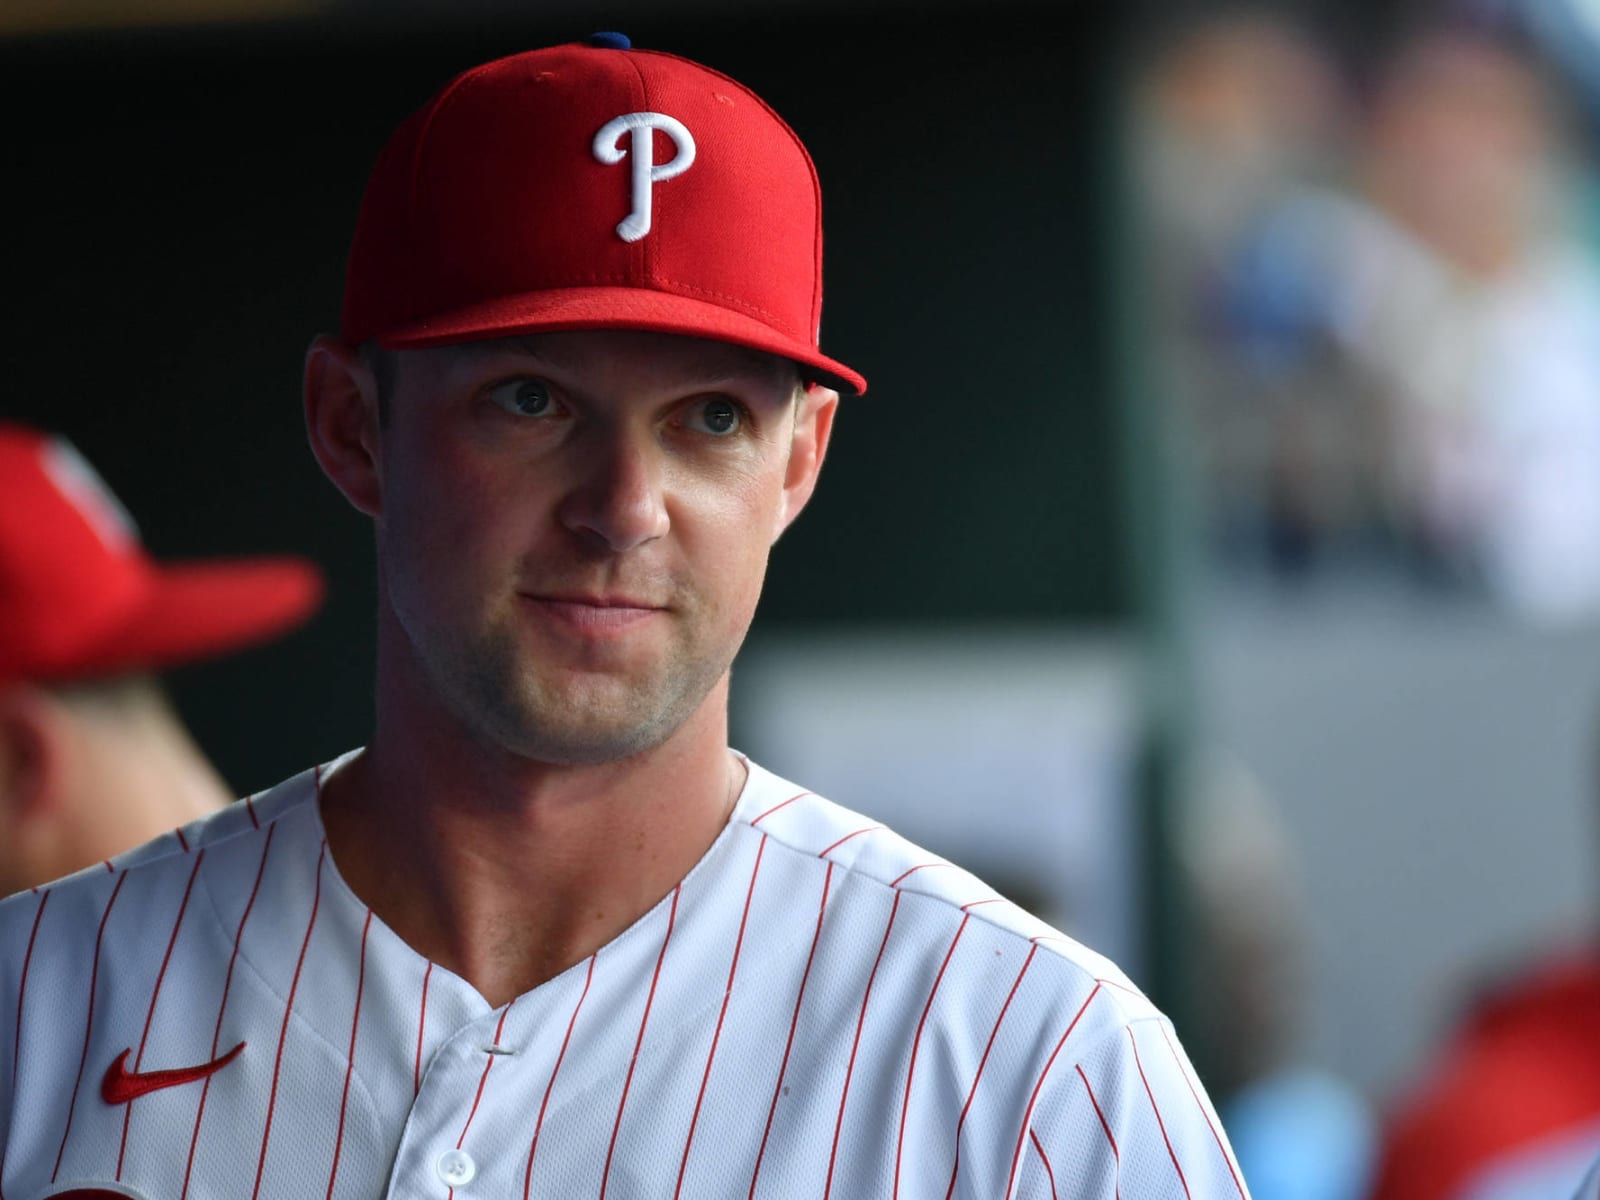 Phillies update: Rhys Hoskins on road back from successful surgery